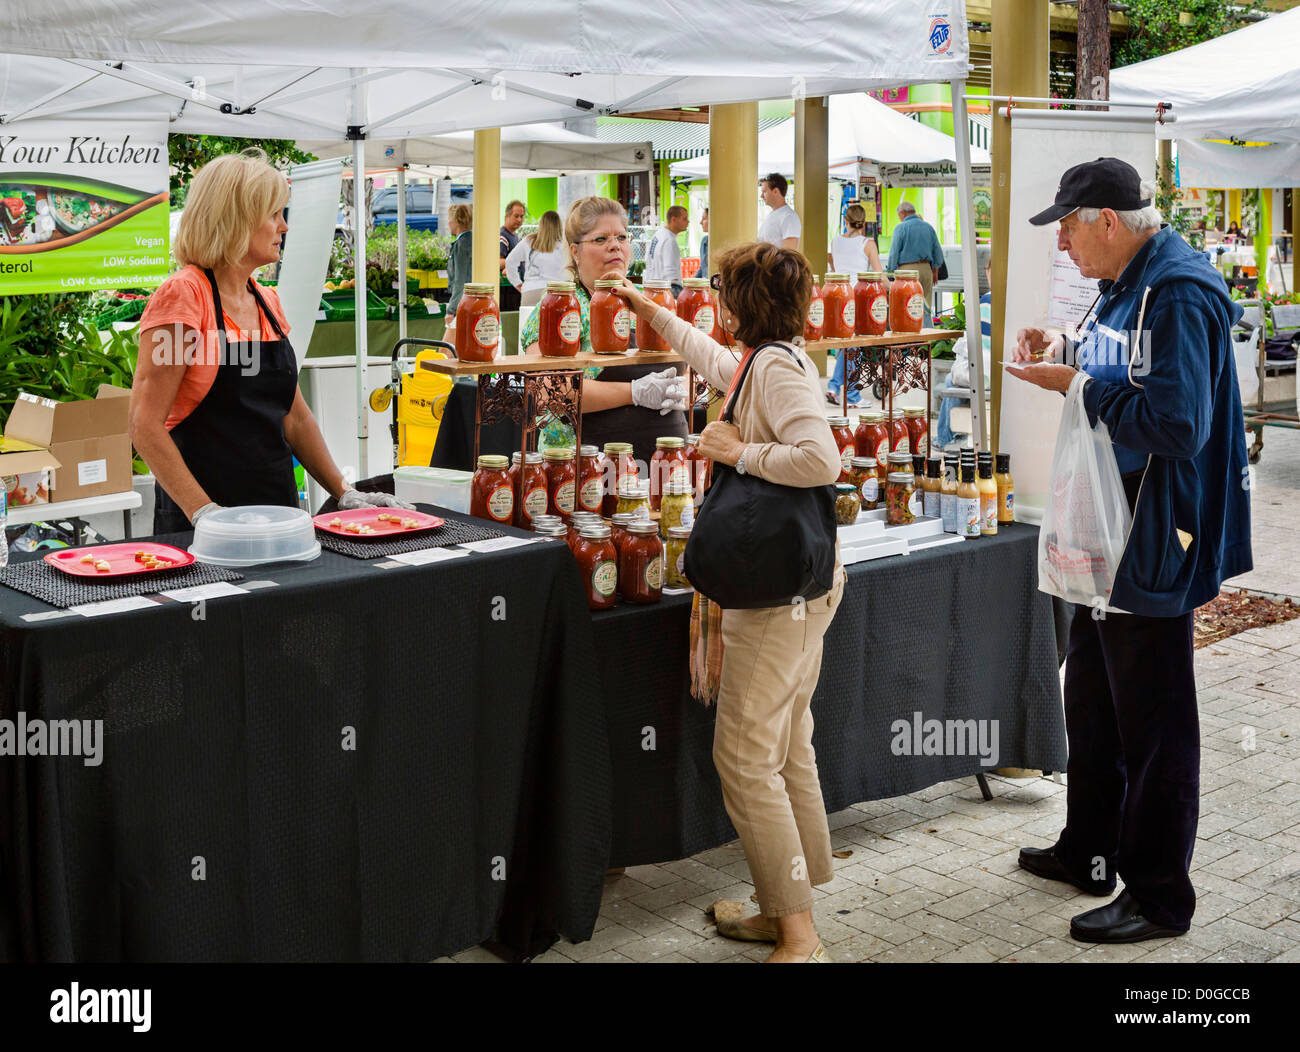 Stall selling spaghetti sauces at the saturday morning Greenmarket at the end of Clematis Street, West Palm Beach, Florida, USA Stock Photo